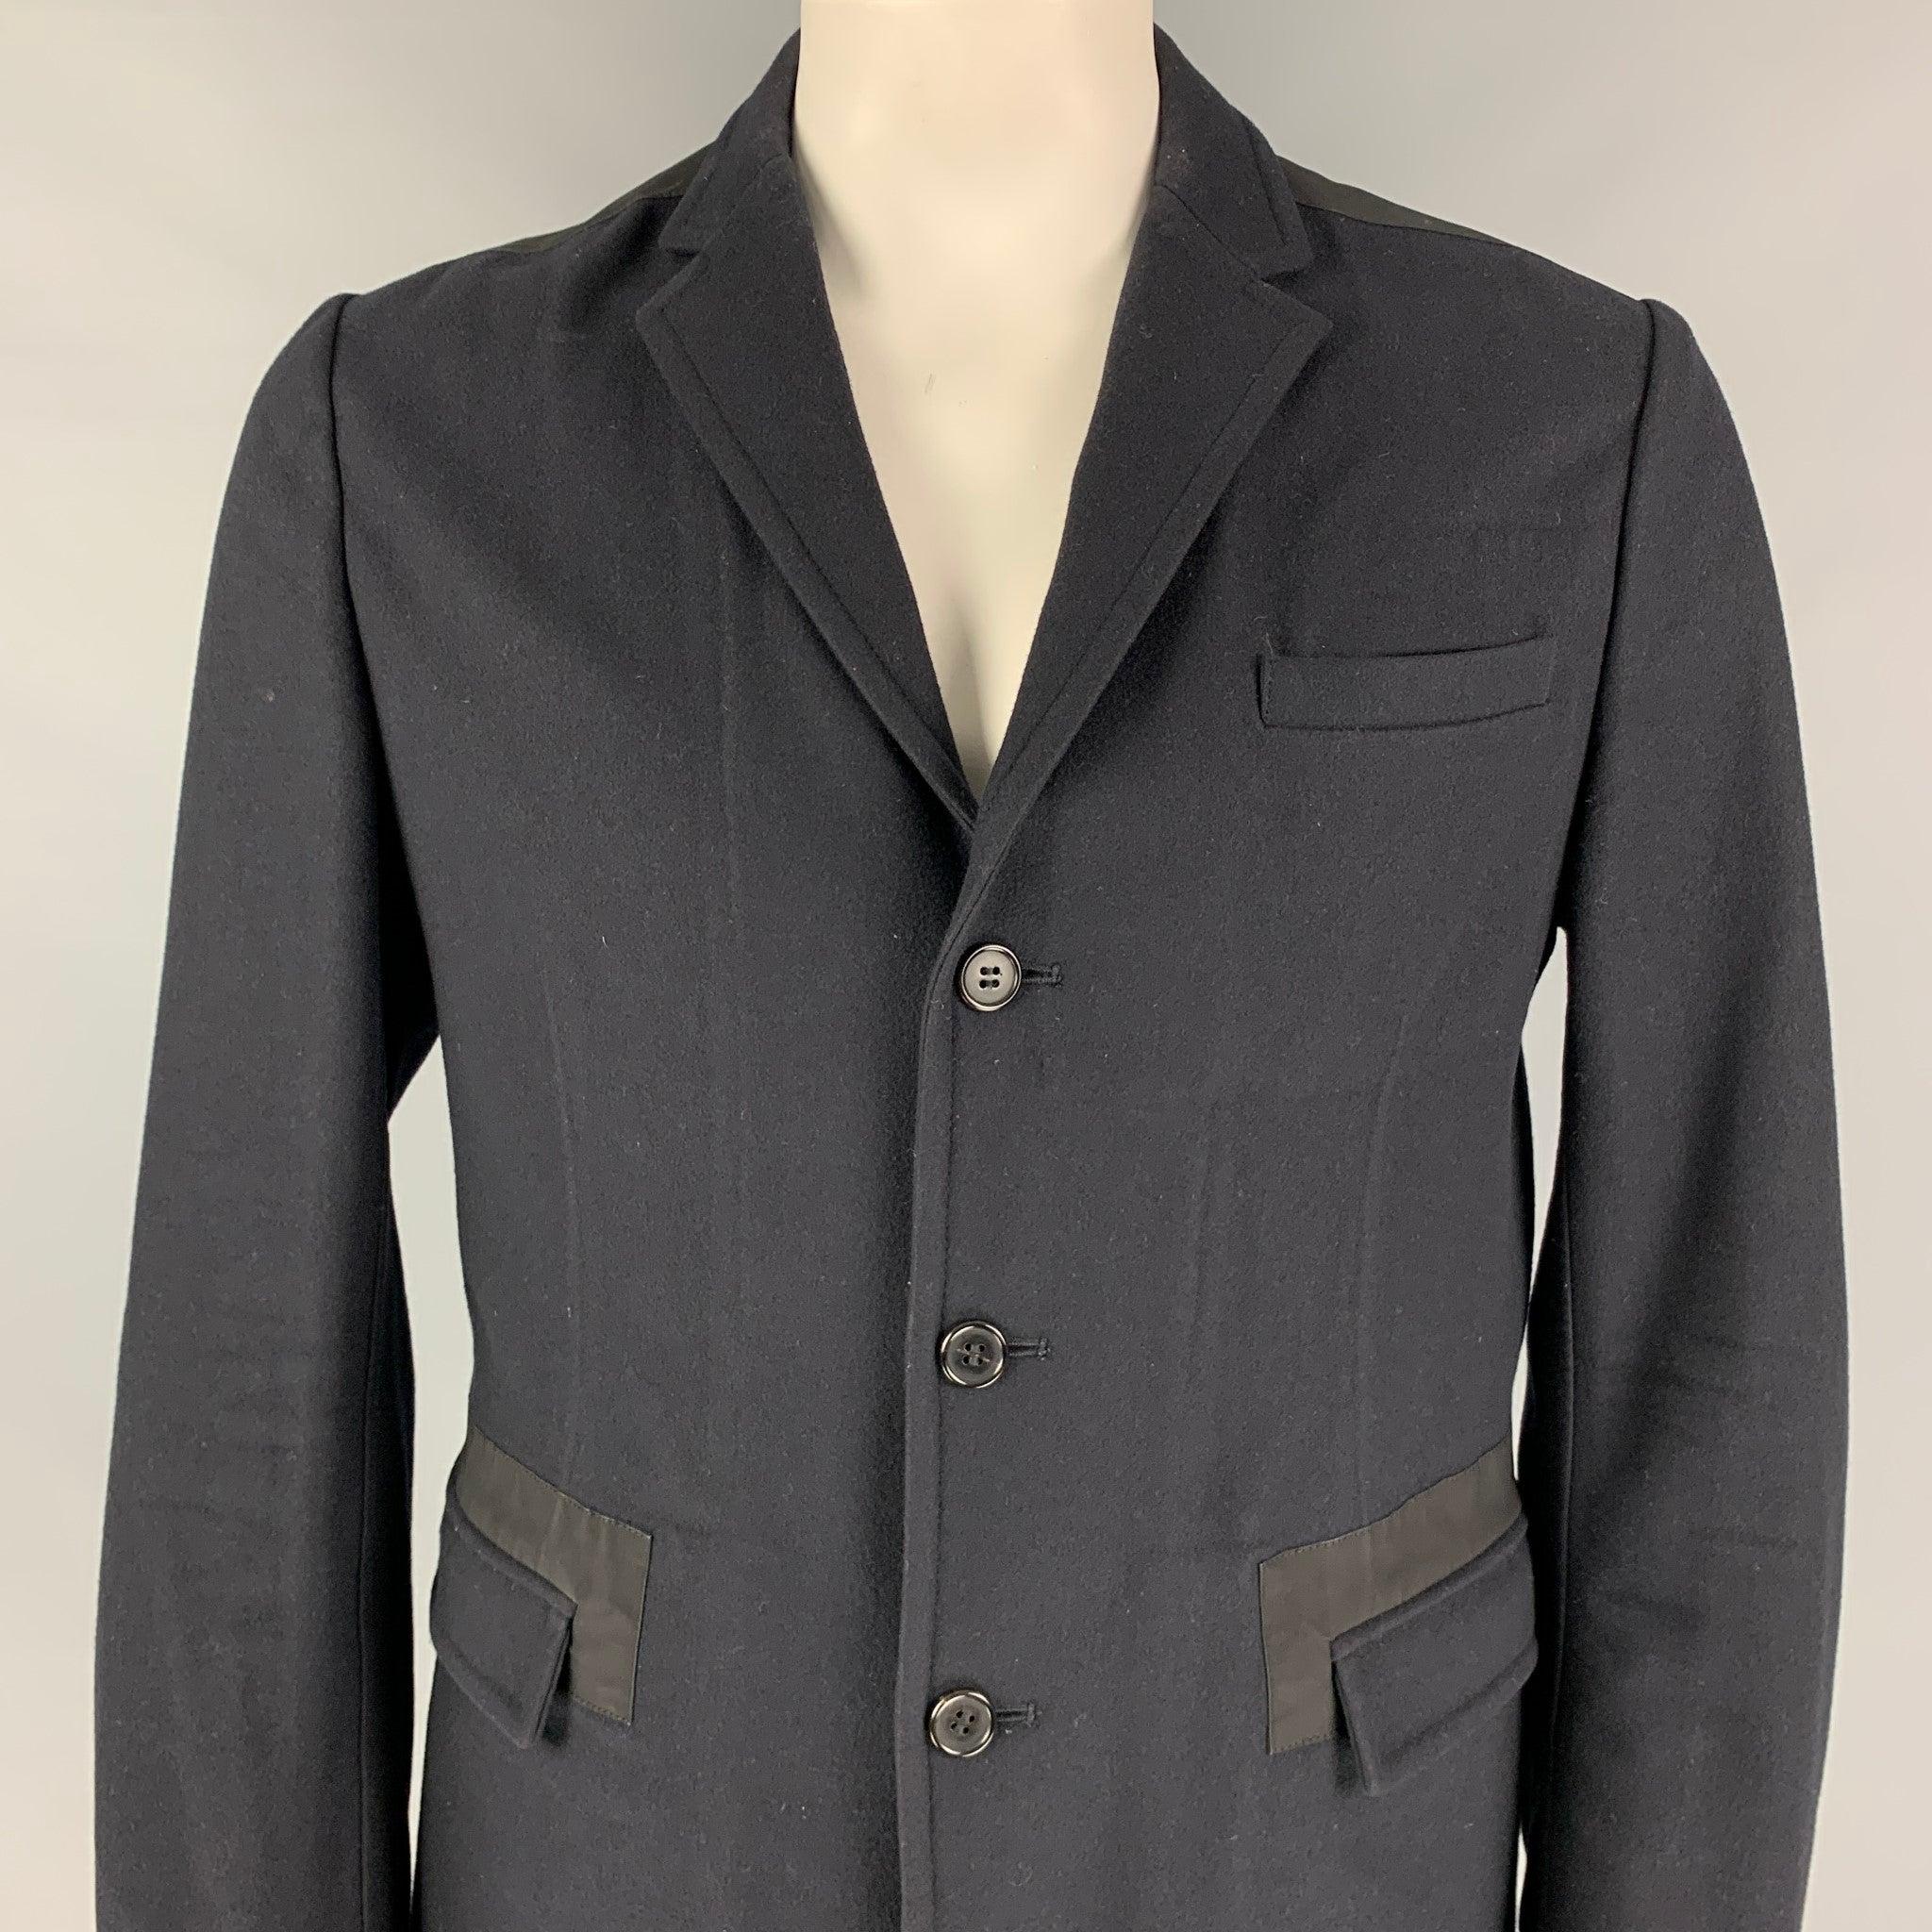 MARNI sport coat comes in a navy & black wool blend featuring a notch lapel, flap pockets, single back vent, and a three button closure. Made in Italy. Very Good Pre-Owned Condition. 

Marked:   50 

Measurements: 
 
Shoulder: 18 inches  Chest: 42